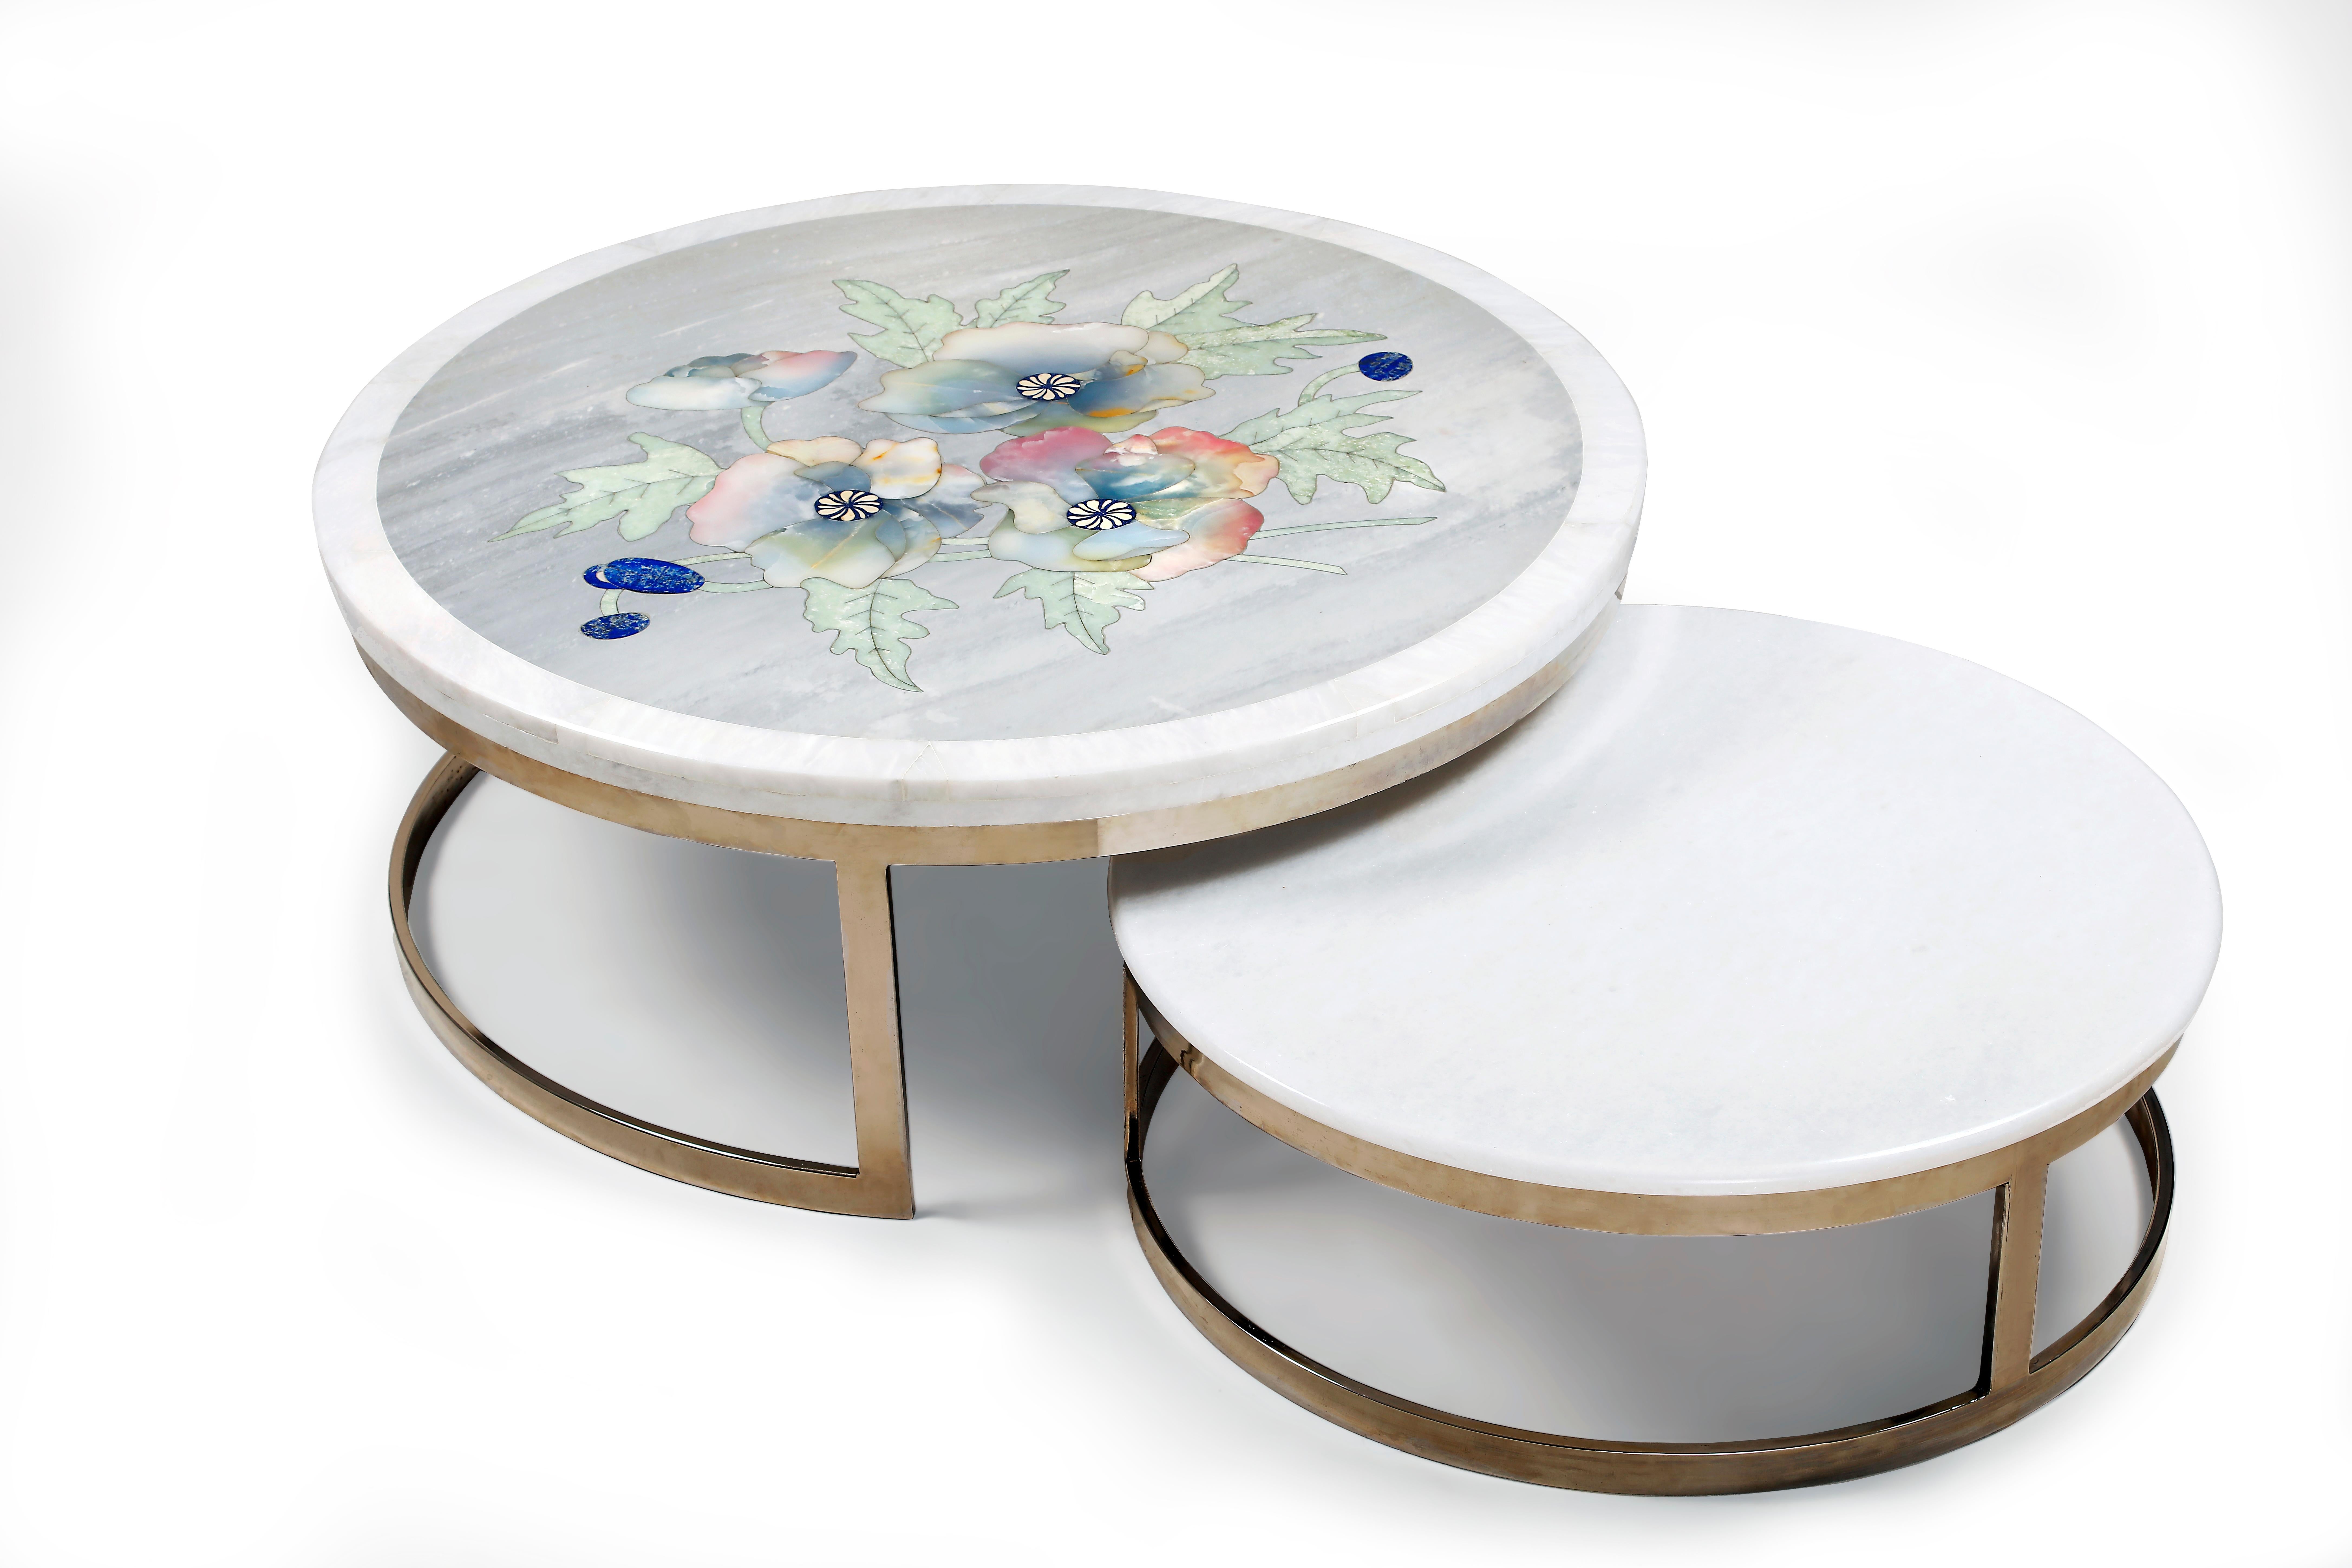 Spring rain nesting tables by Studio Lel
Dimensions: D107 x W107 x H41 cm , D91 x W91 x H36 cm
Materials: Lapis lazuli, onyx, jade, marble, chrome.

Taking its name from the Majorelle Garden in Marrakech, which was painted entirely by Jacques